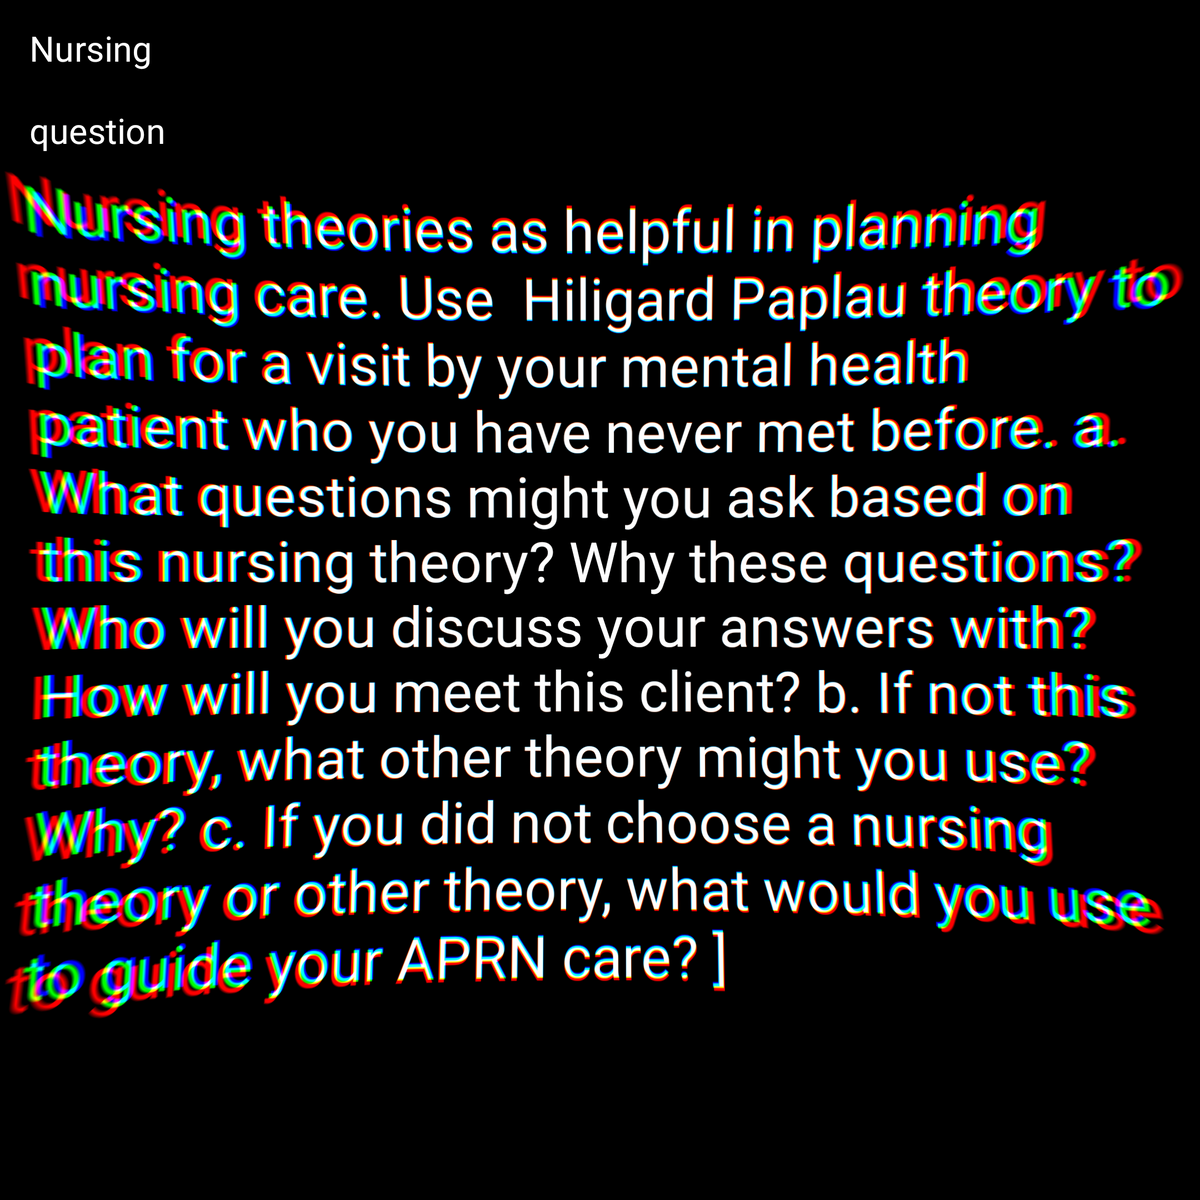 Nursing
question
Nursing theories as helpful in planning
mursing care. Use Hiligard Paplau theory to
plan for a visit by your mental health
patient who you have never met before. a.
What questions might you ask based on
this nursing theory? Why these questions?
Who will you discuss your answers with?
How will you meet this client? b. If not this
theory, what other theory might you use?
Why? c. If you did not choose a nursing
theory or other theory, what would you use
to guide your APRN care? ]